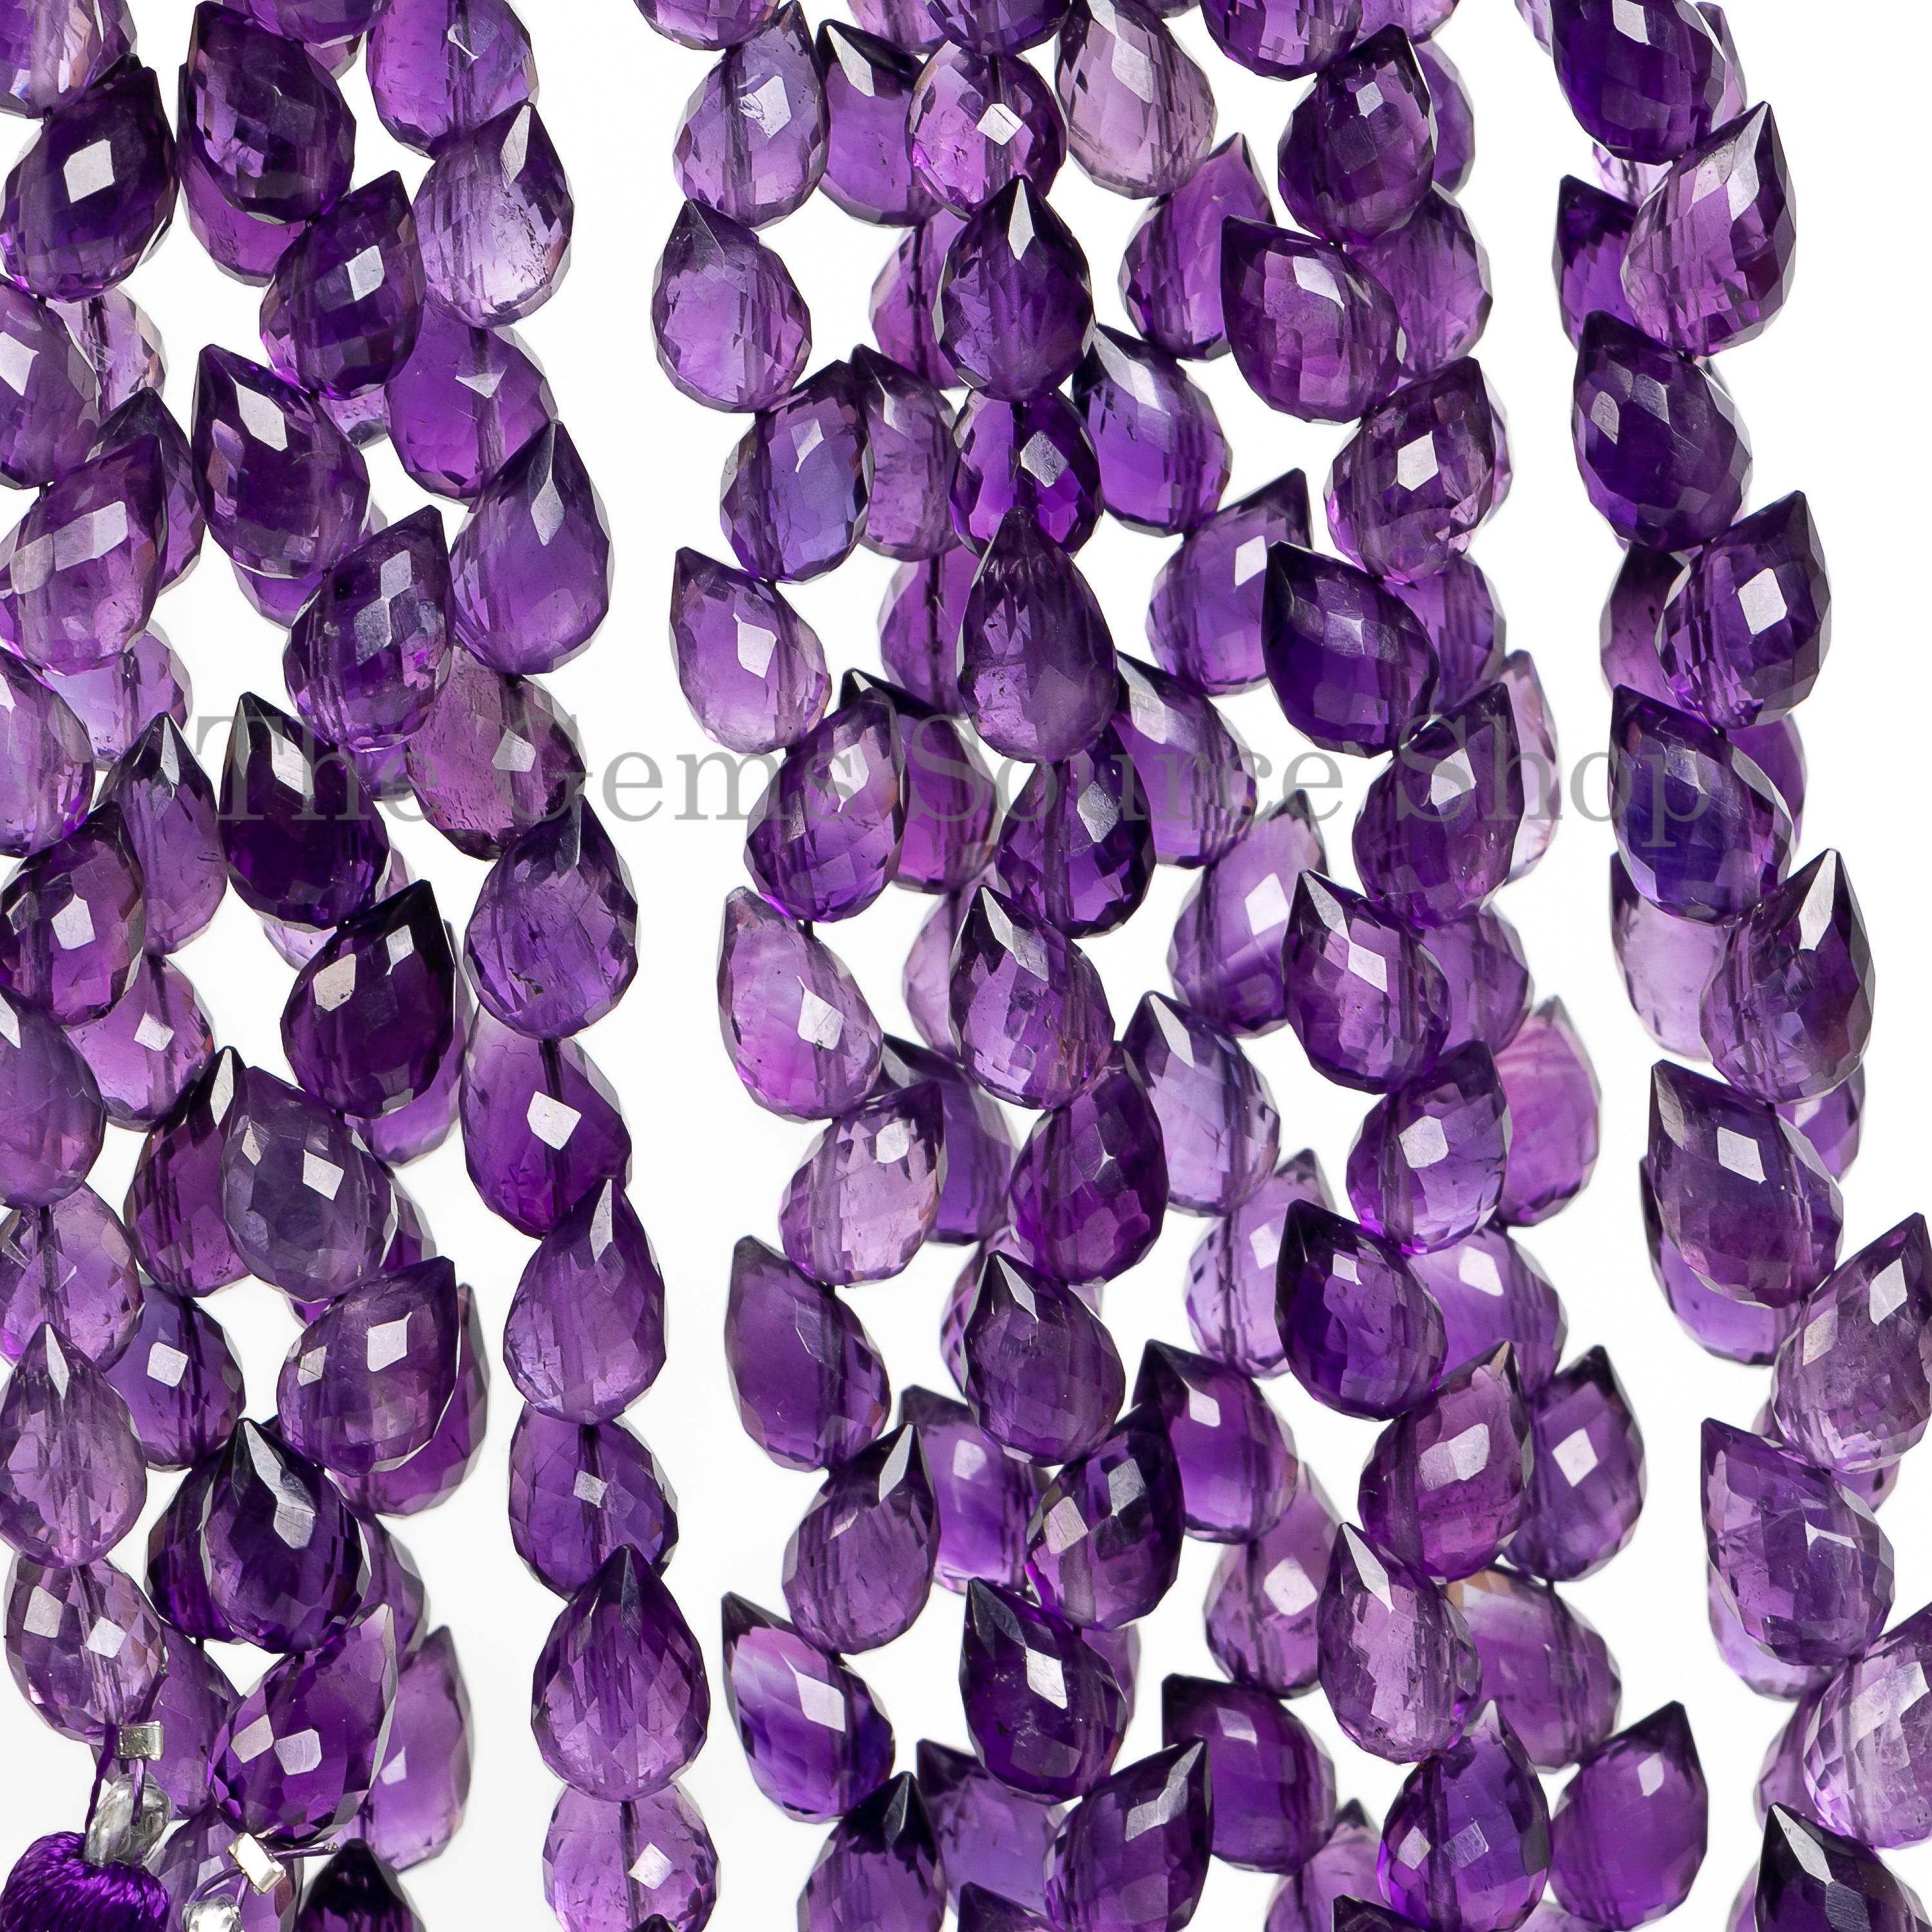 4x6-6x9 mm Natural African Amethyst Briolette Side Drill Drops Loose Gemstone Beads-8"